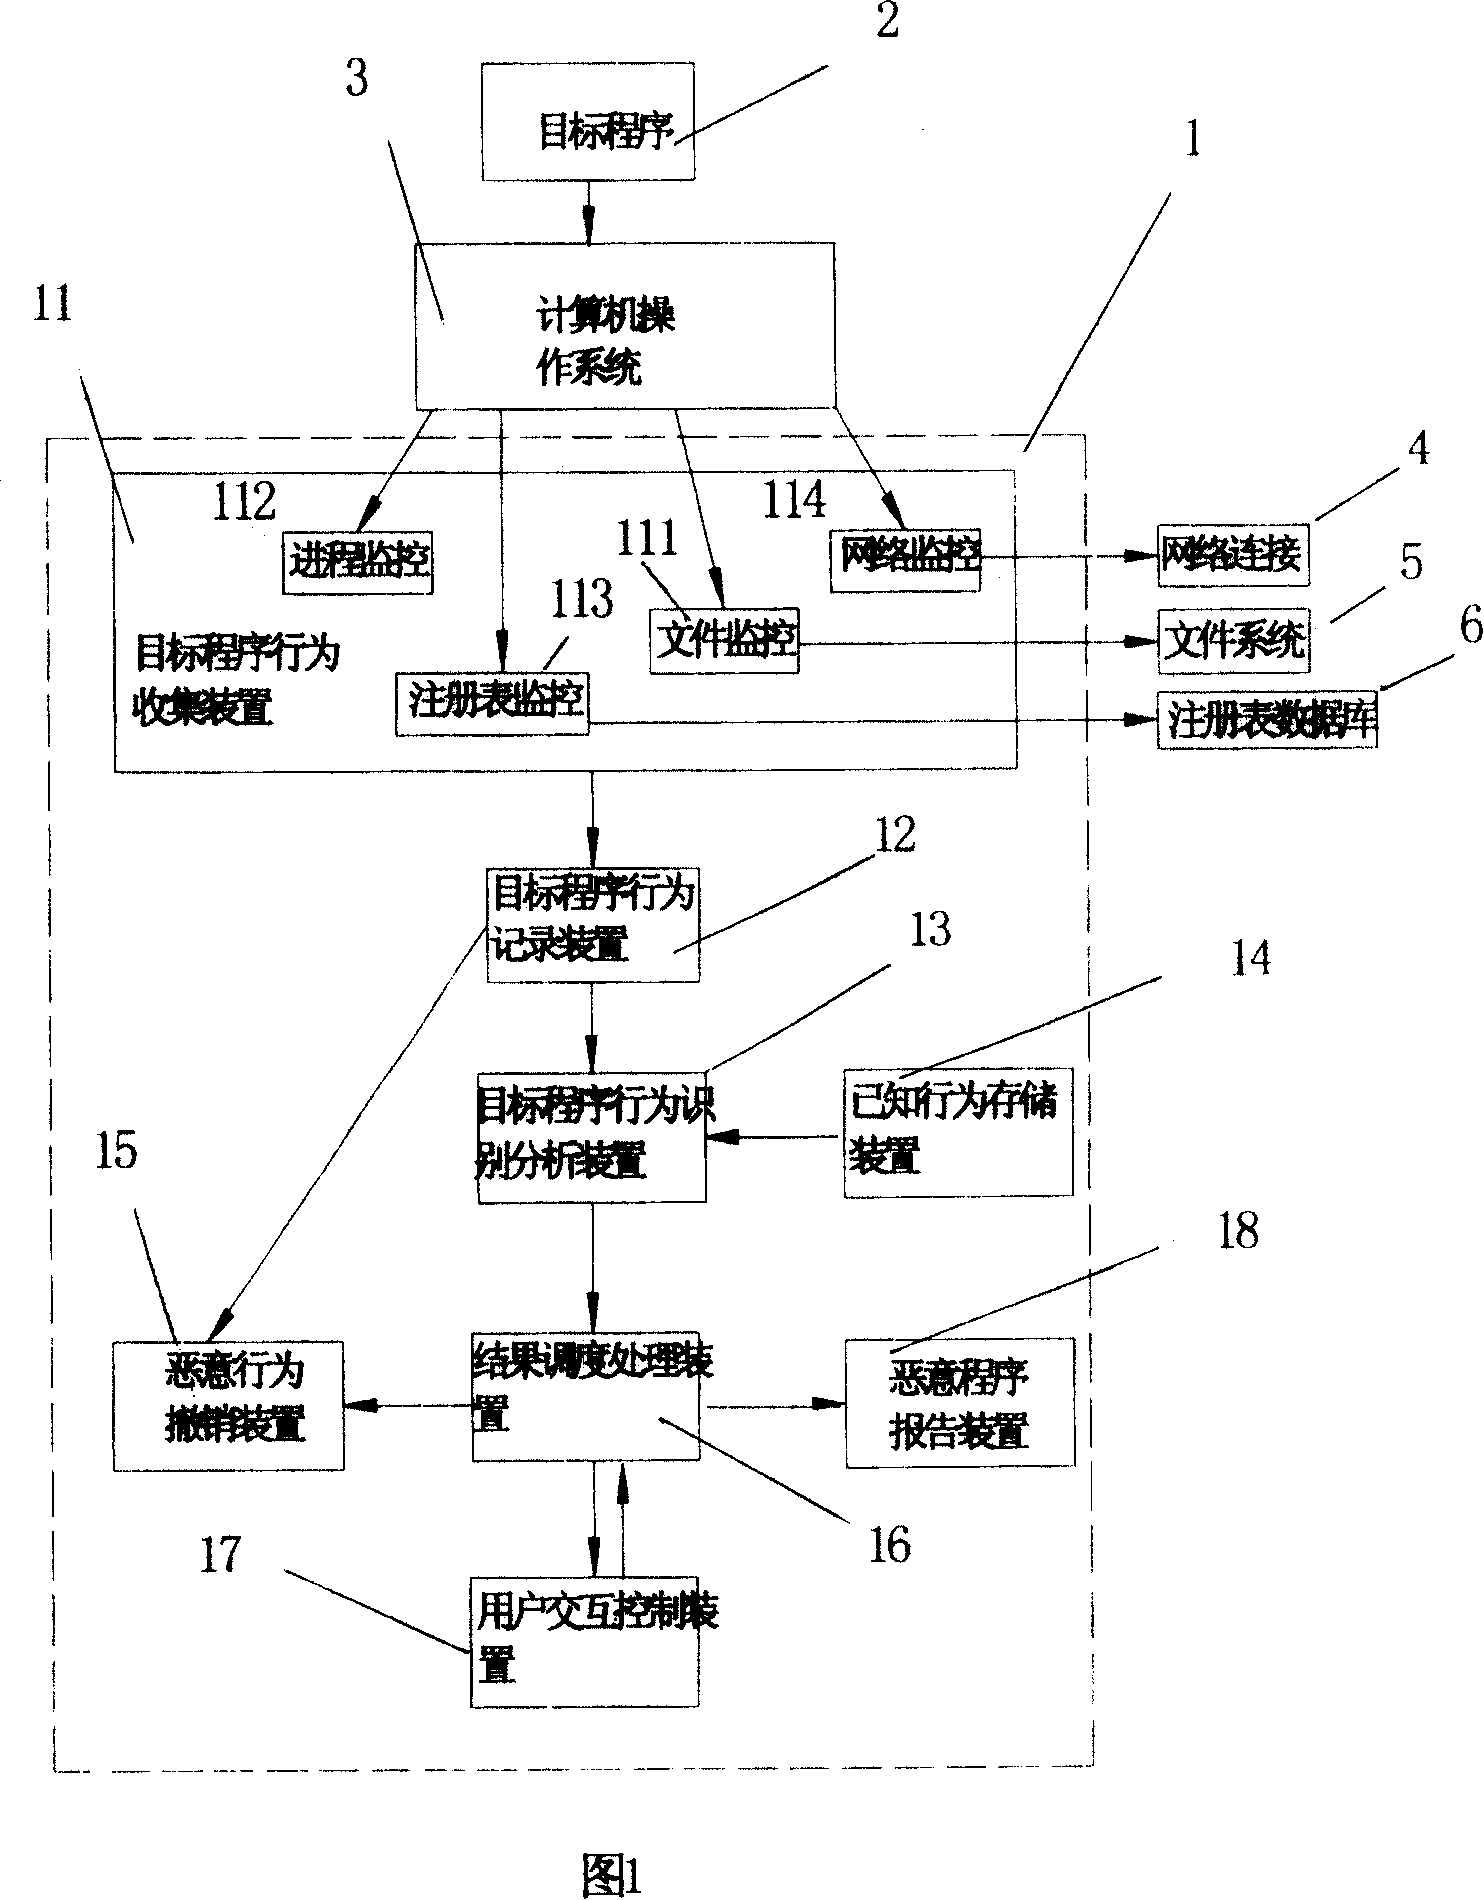 System and method for detecting and defending computer worm